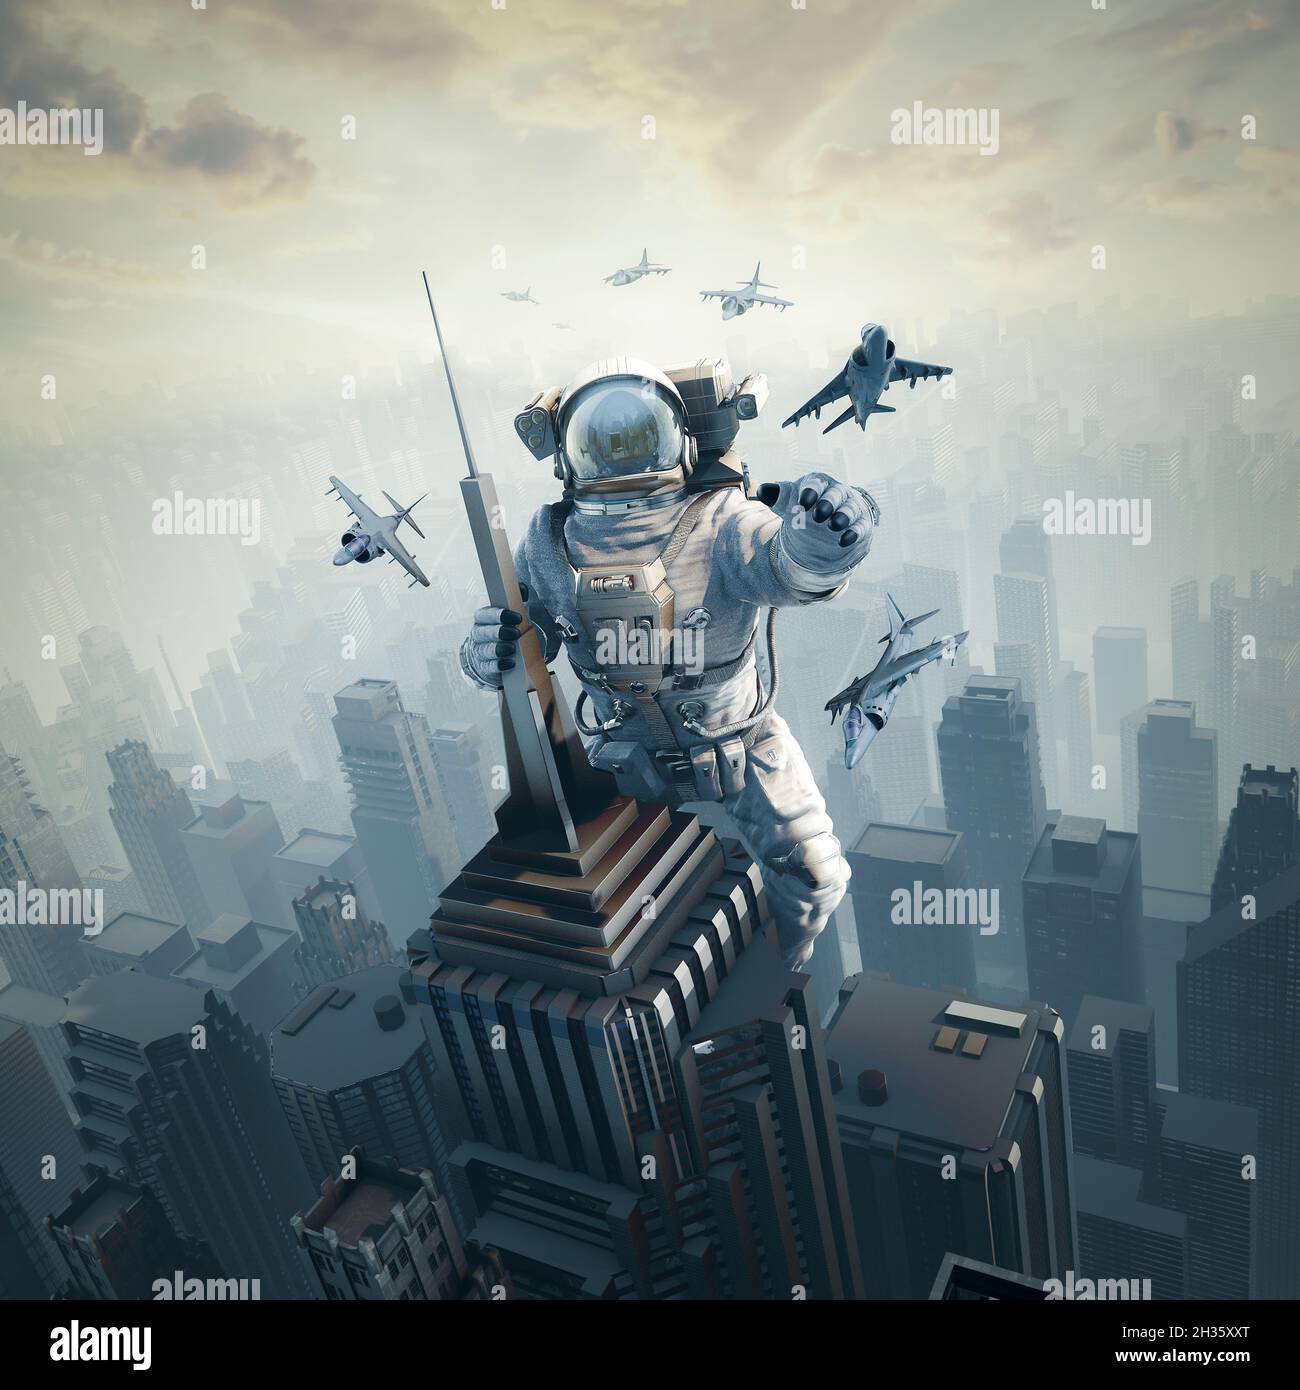 City monster astronaut - 3D illustration of science fiction giant space suit wearing character climbing skyscraper while being attacked by fighter pla Stock Photo